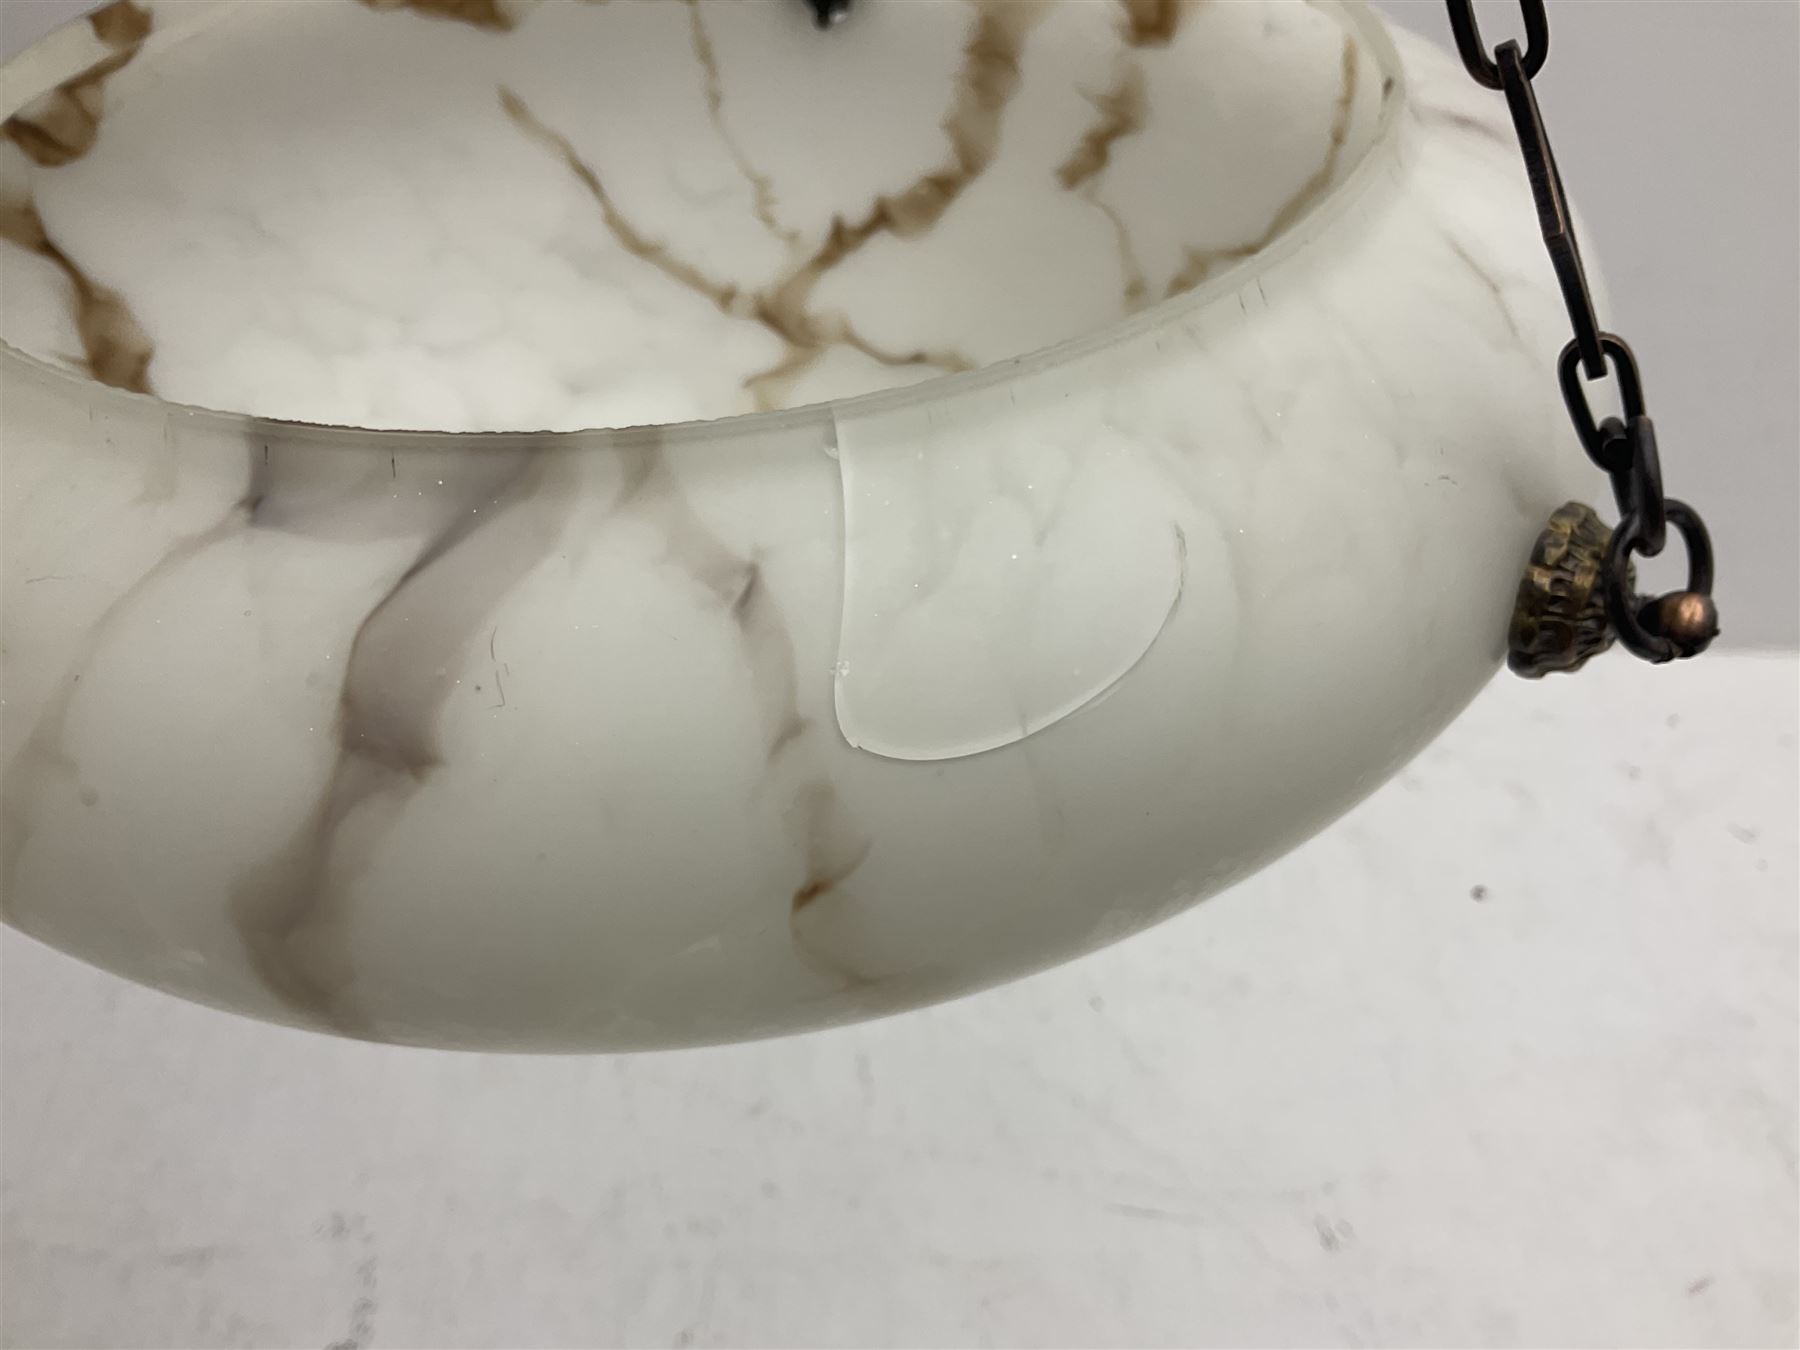 Art Deco style frosted glass marbled fly catcher light shade - Image 4 of 8